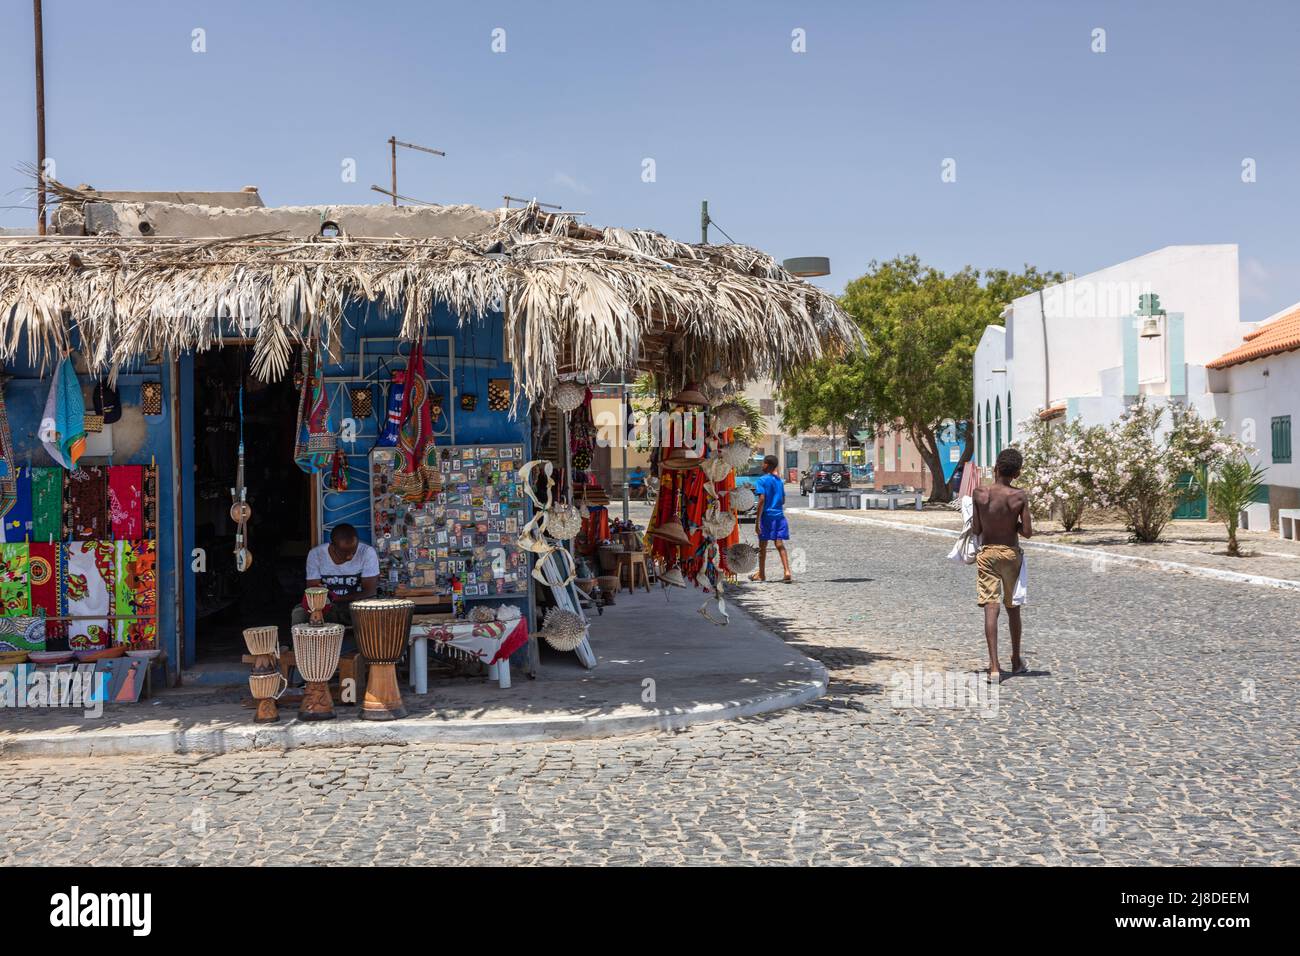 Traditional shop selling souvenirs in a street in Palmeira, Sal, Cape Verde Islands, Africa Stock Photo